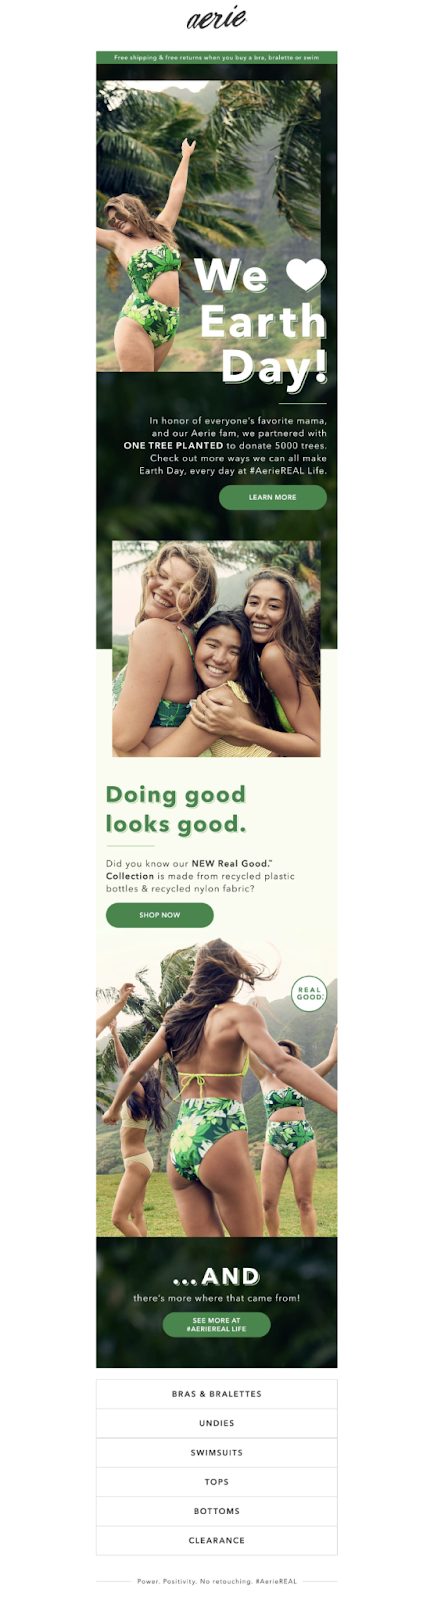 Aerie Earth Day email example